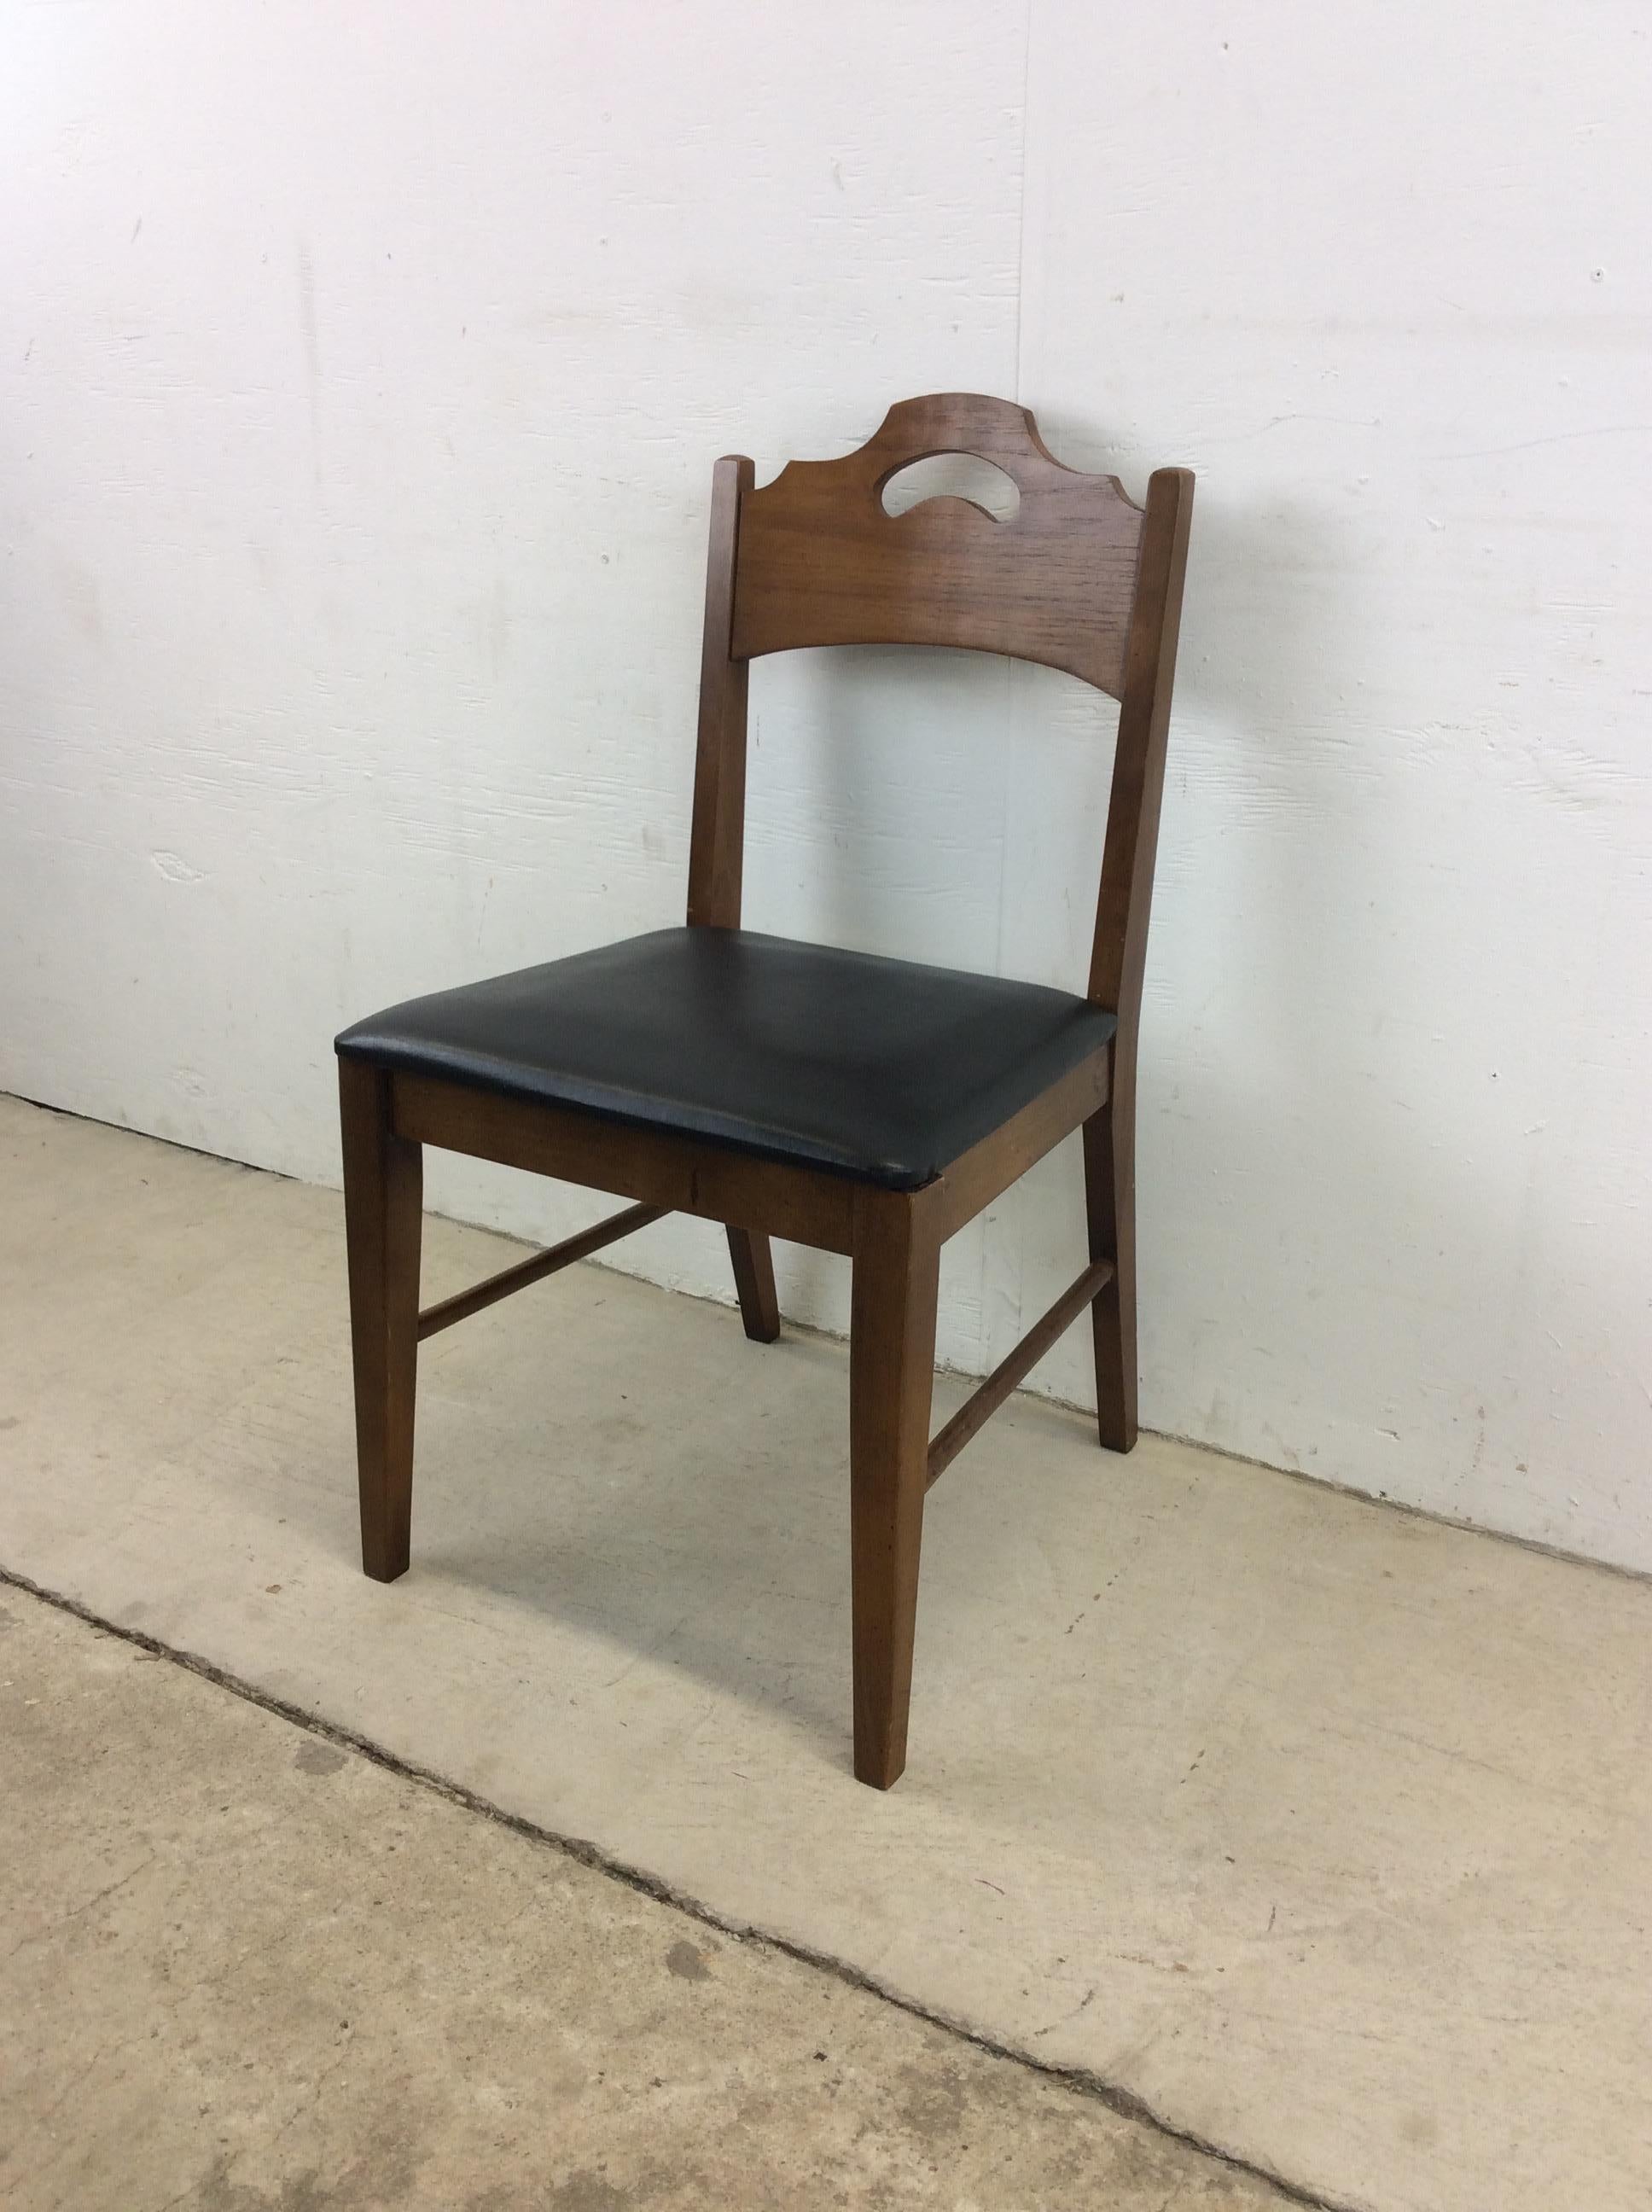 This mid century modern side chair features hardwood construction, original walnut finish, vintage black vinyl upholstered seat, and wooden seat back with carved handle.

Dimensions: 19w 20d 18sh 34.5h 


